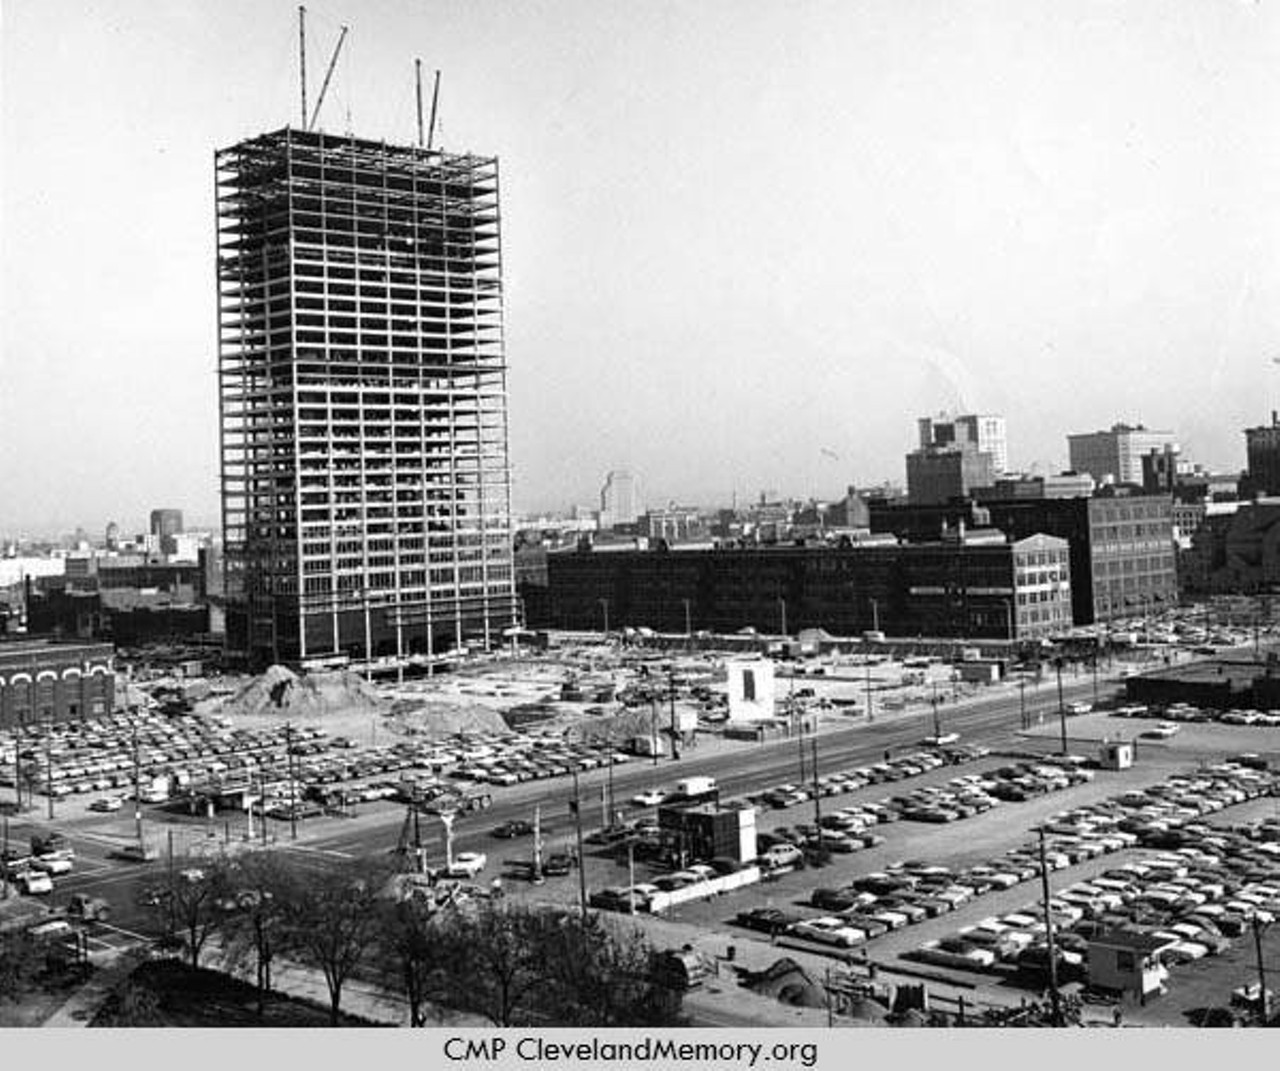 Erieview Plaza parking lot and unfinished Erieview Tower, 1964